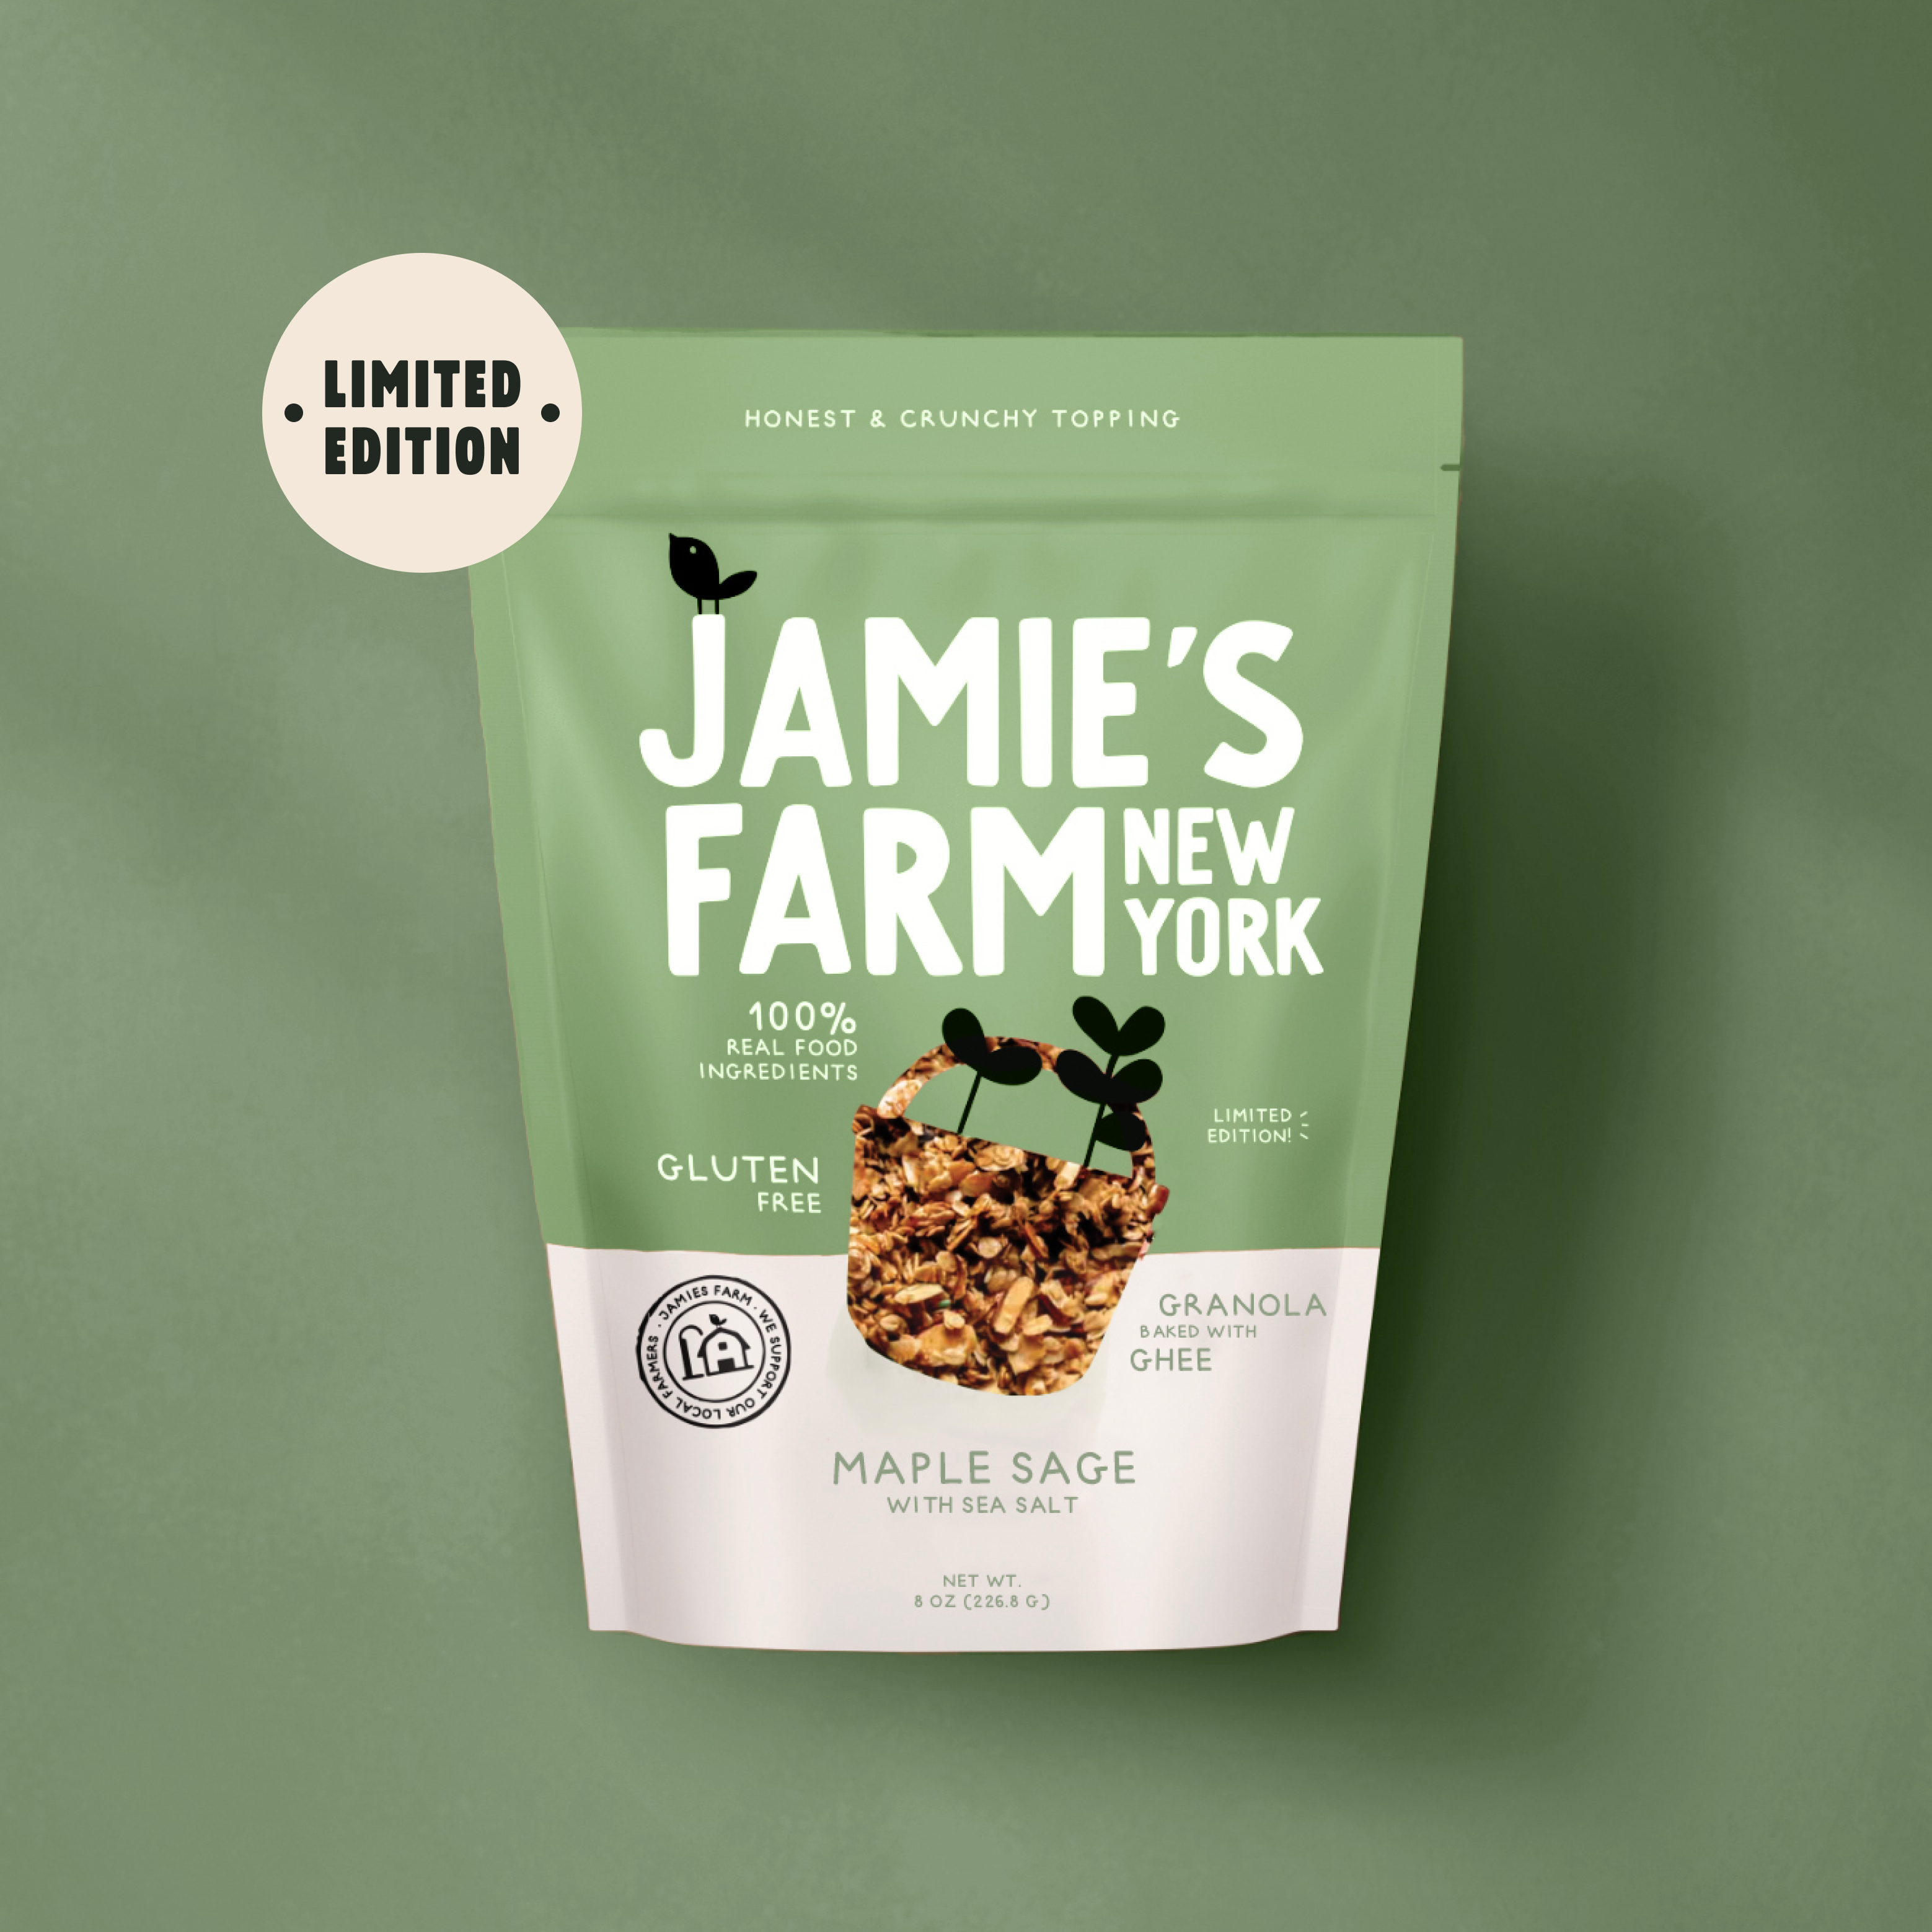 Maple Sage Granola from Jamie's Farm Best Granola in NYC, Gluten-Free, Organic, Baked with Ghee Granola